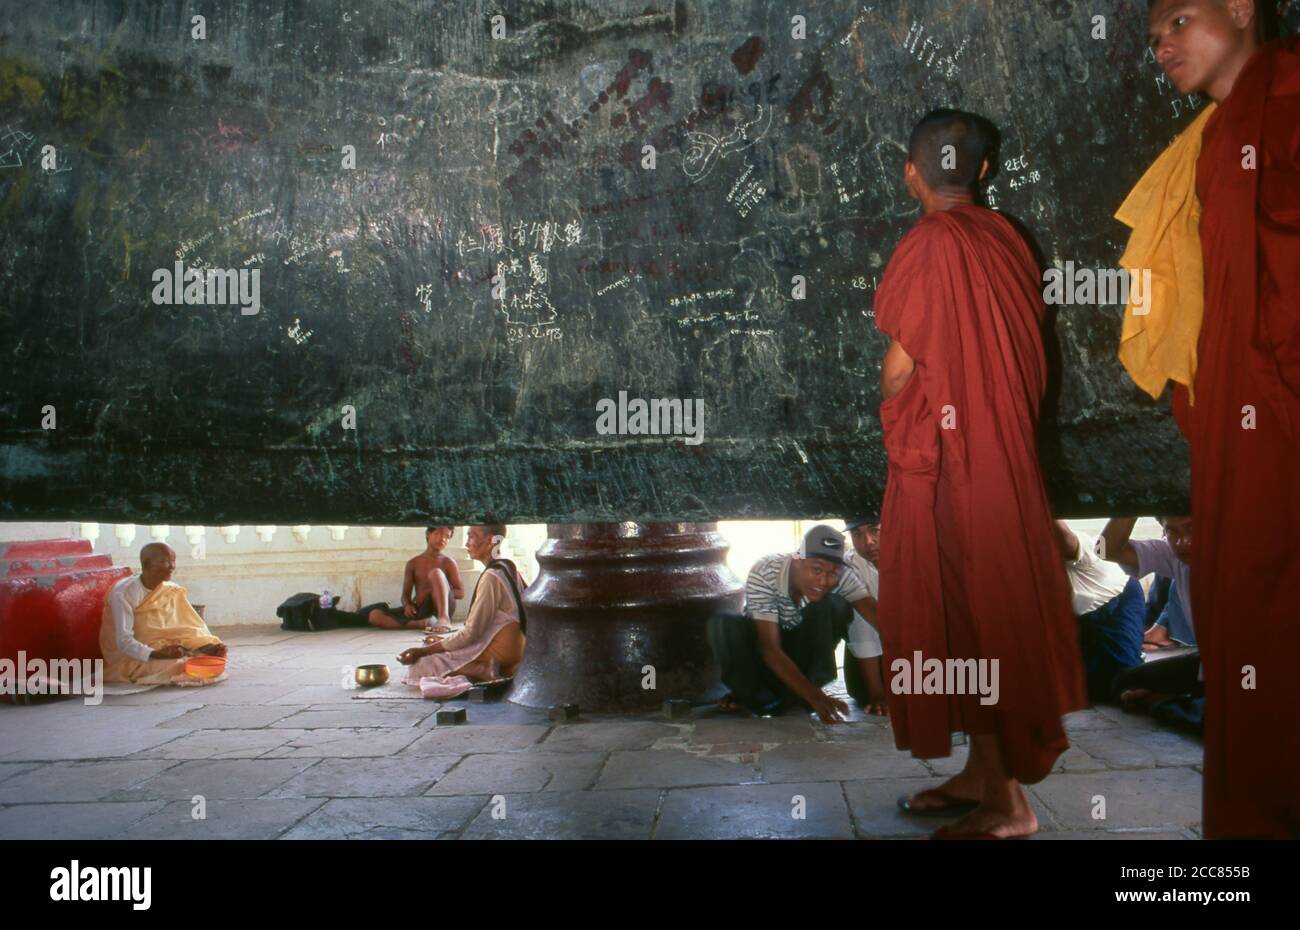 Burma / Myanmar: Buddhist monks inspect the inside of the Mingun Bell in Sagaing Division, Burma. The Mingun Bell is a giant bell located in Mingun, on the western bank of the Irrawaddy River, Sagaing Region, Myanmar. It was the heaviest functioning bell in the world at several times in history. The weight of the bell is 90,718 kg or 199,999 pounds. The bell is uncracked and in good ringing condition. Casting of the bell started in 1808 and was finished by 1810. King Bodawpaya (r. 1782–1819) had this gigantic bell cast to go with his huge stupa, Mingun Pahtodawgyi. Stock Photo